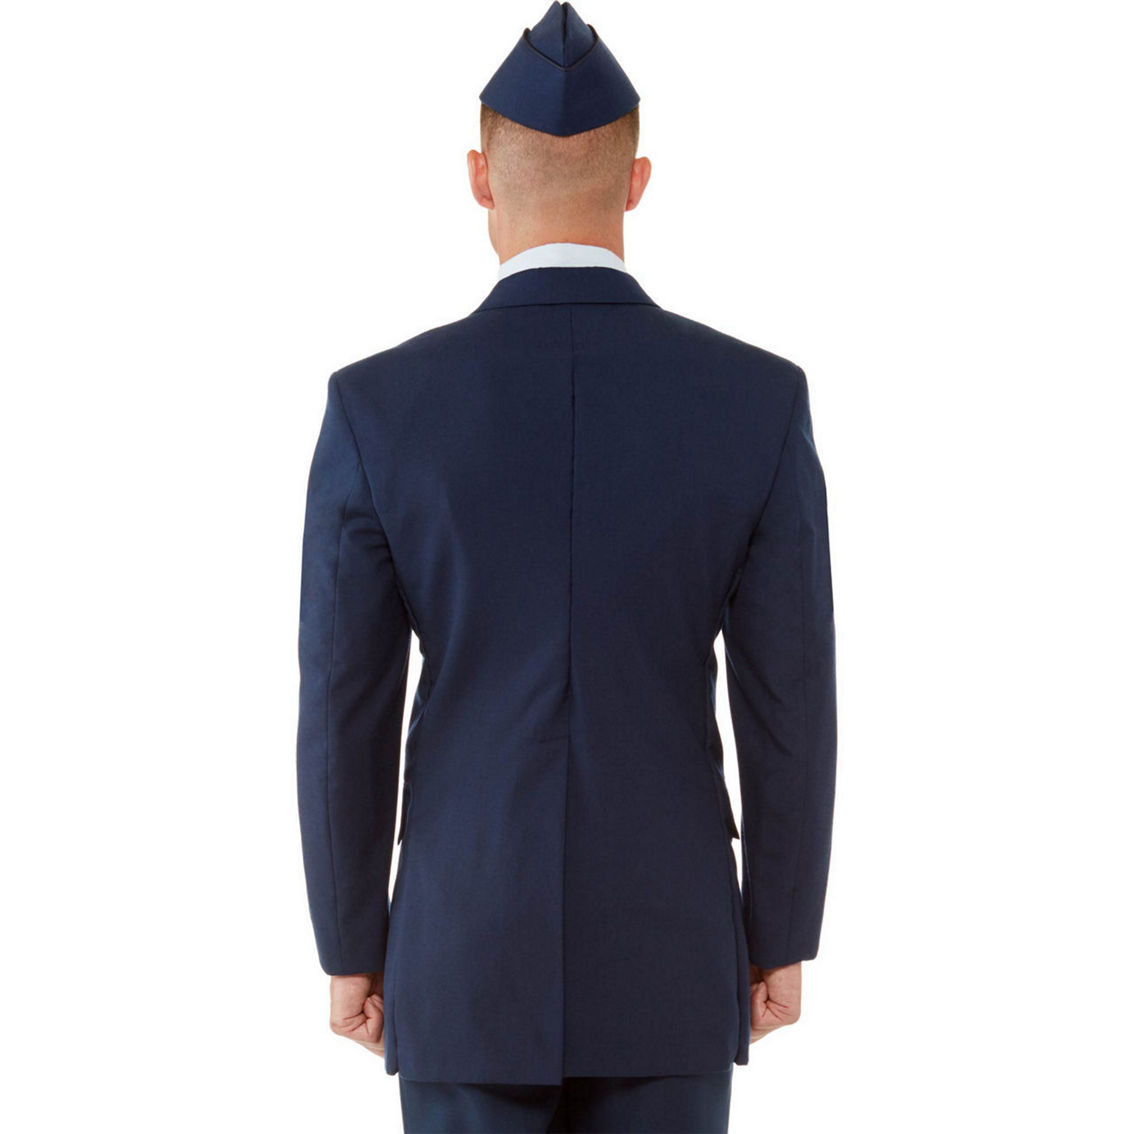 Air Force Enlisted Service Dress Coat Male - Image 2 of 4